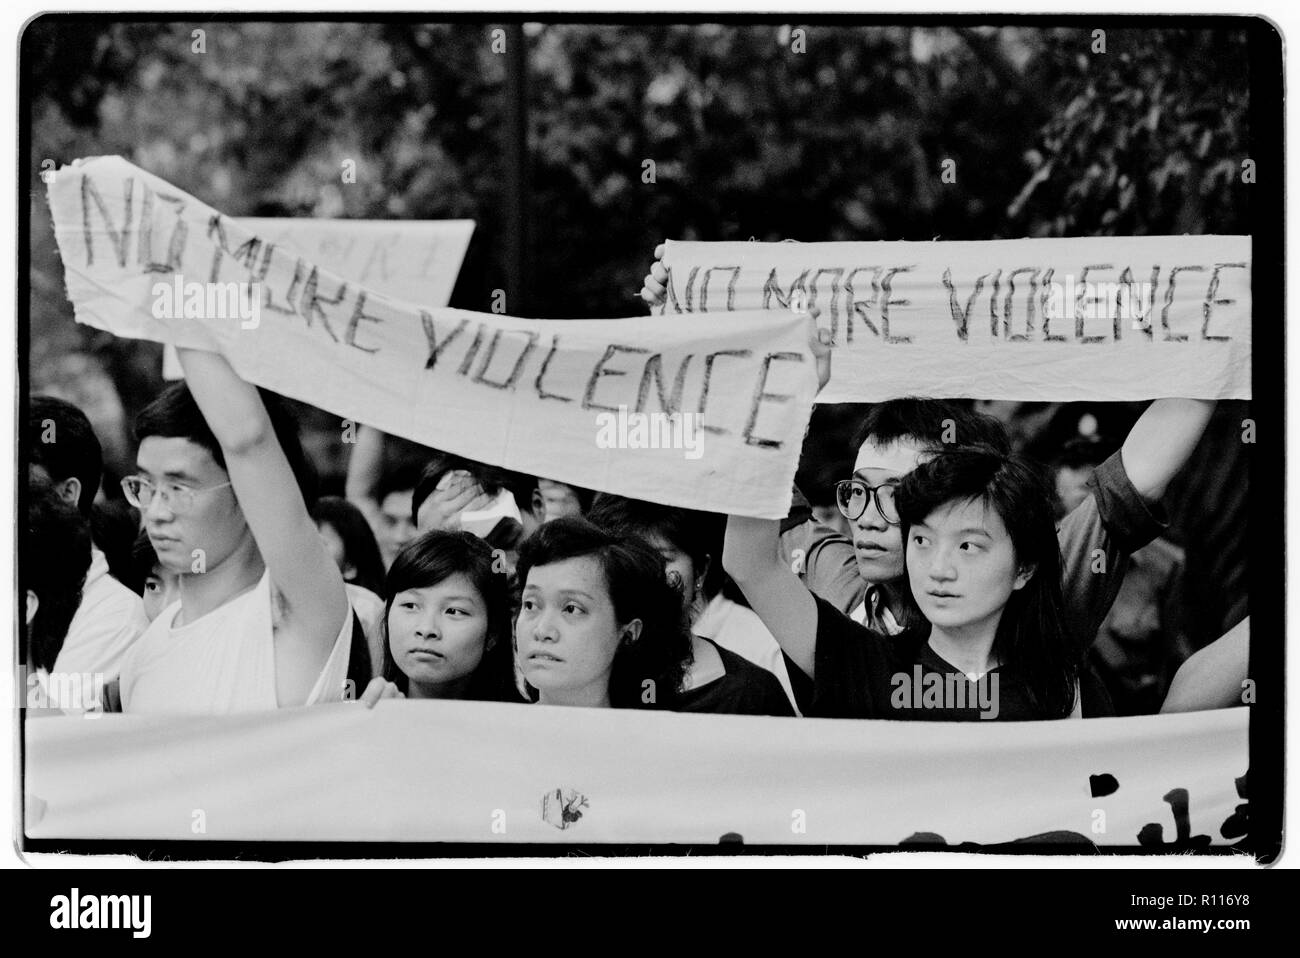 Hong Kong two days after the massacre in Tiananmen Square in Beijing in June 1989 Students protest the deaths of fellow students in Beijing days earlier near the British Embassy in Hong Kong Stock Photo